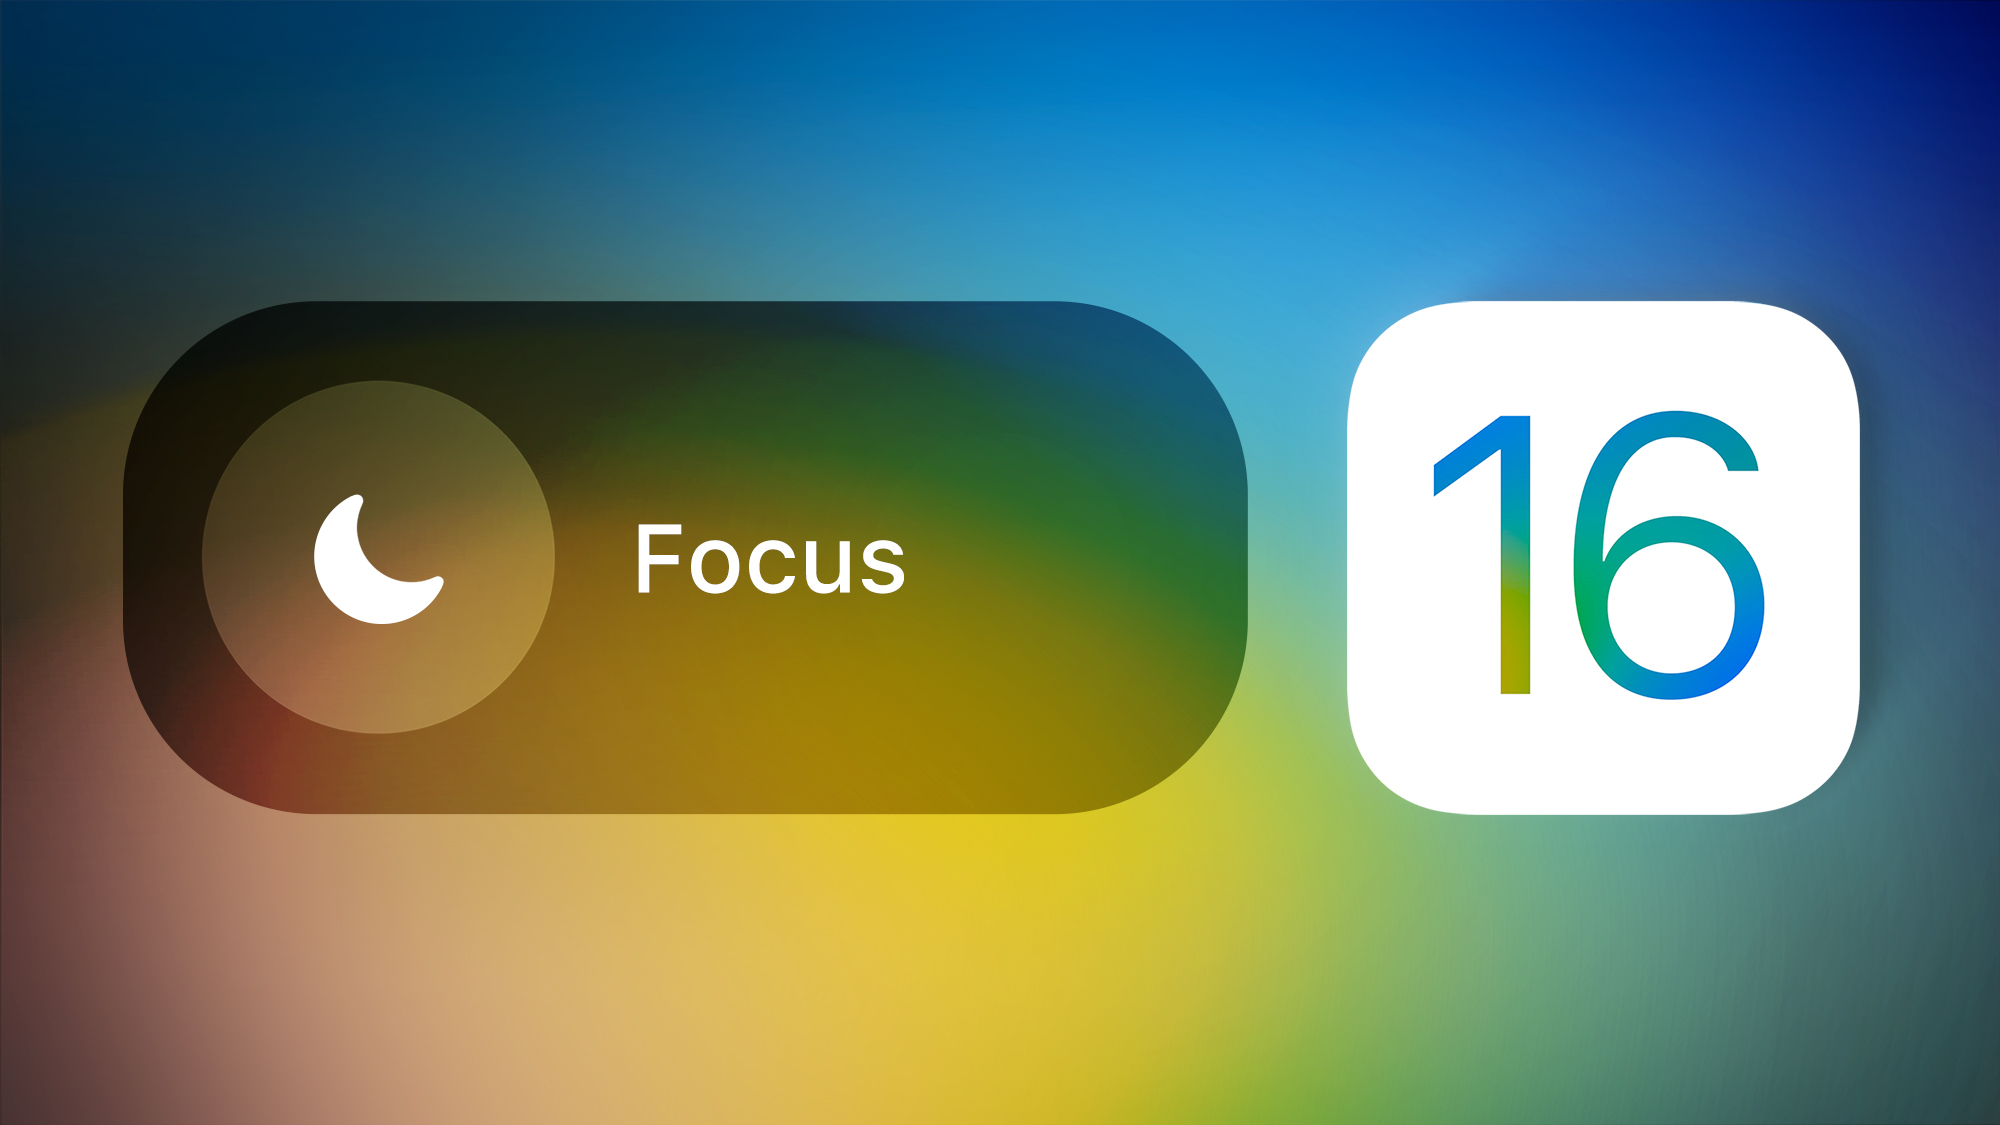 iOS 16 Focus Guide: What’s New With Apple’s Focus Mode